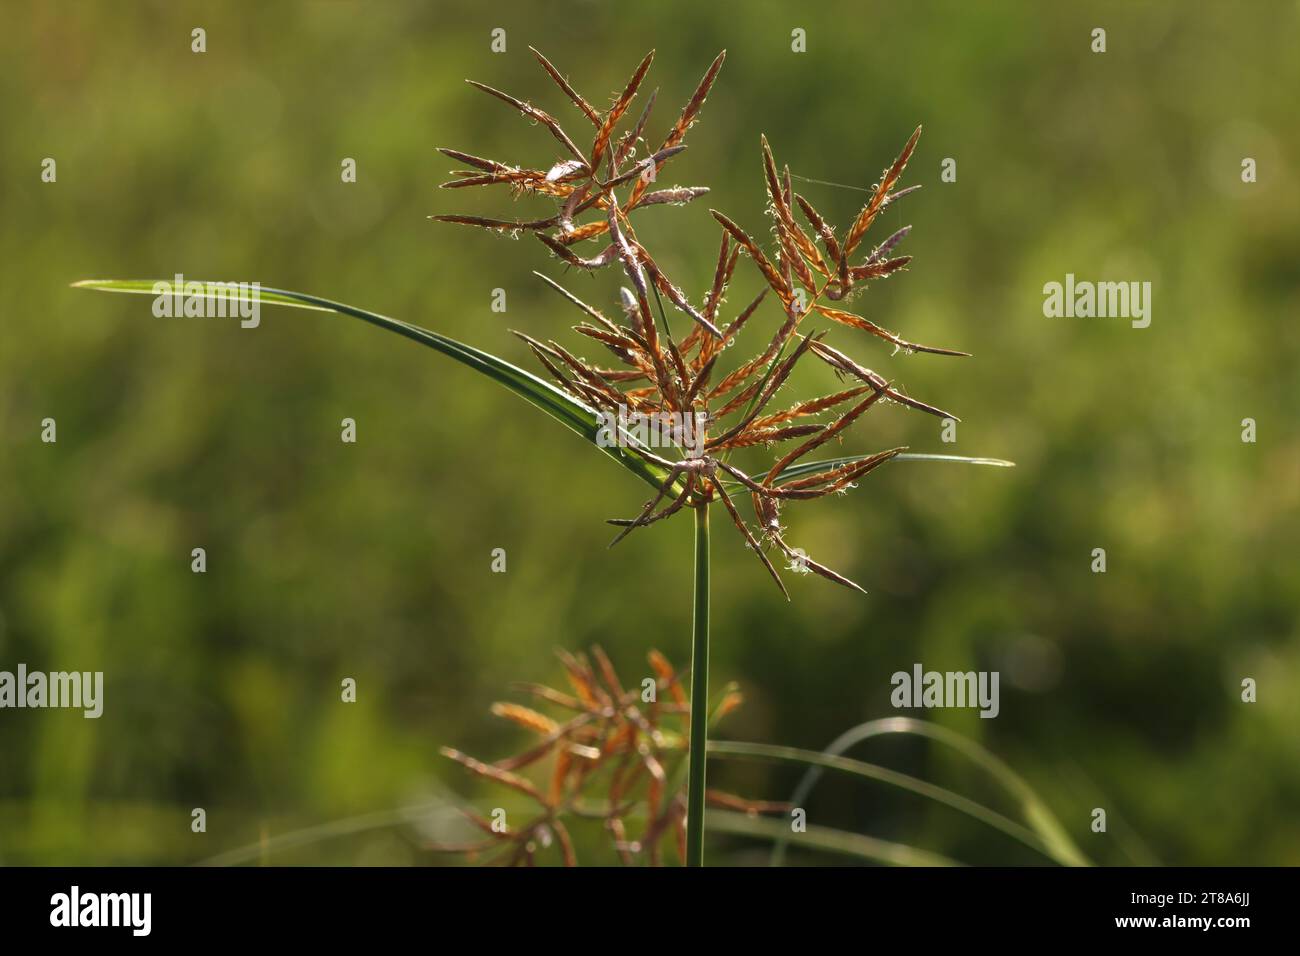 Closeup of nature. Brown grass, Blurred background. Nut grass. Stock Photo